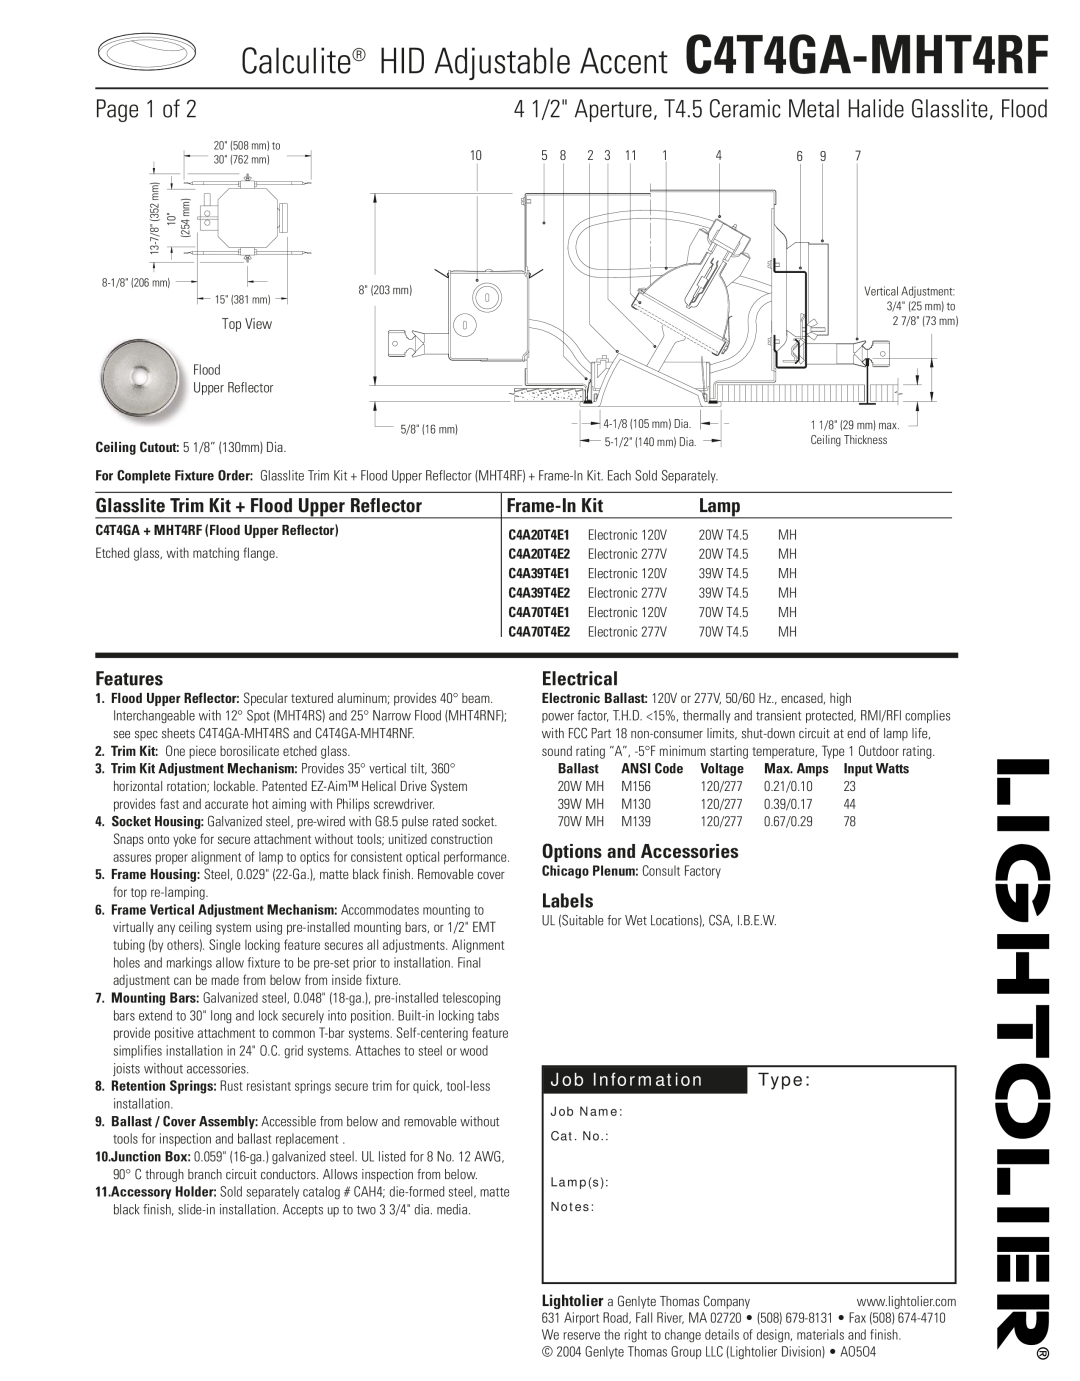 Lightolier manual Calculite HID Adjustable Accent C4T4GA-MHT4RF, Page 1 of, Job Information, Type, Frame-InKit, Lamp 